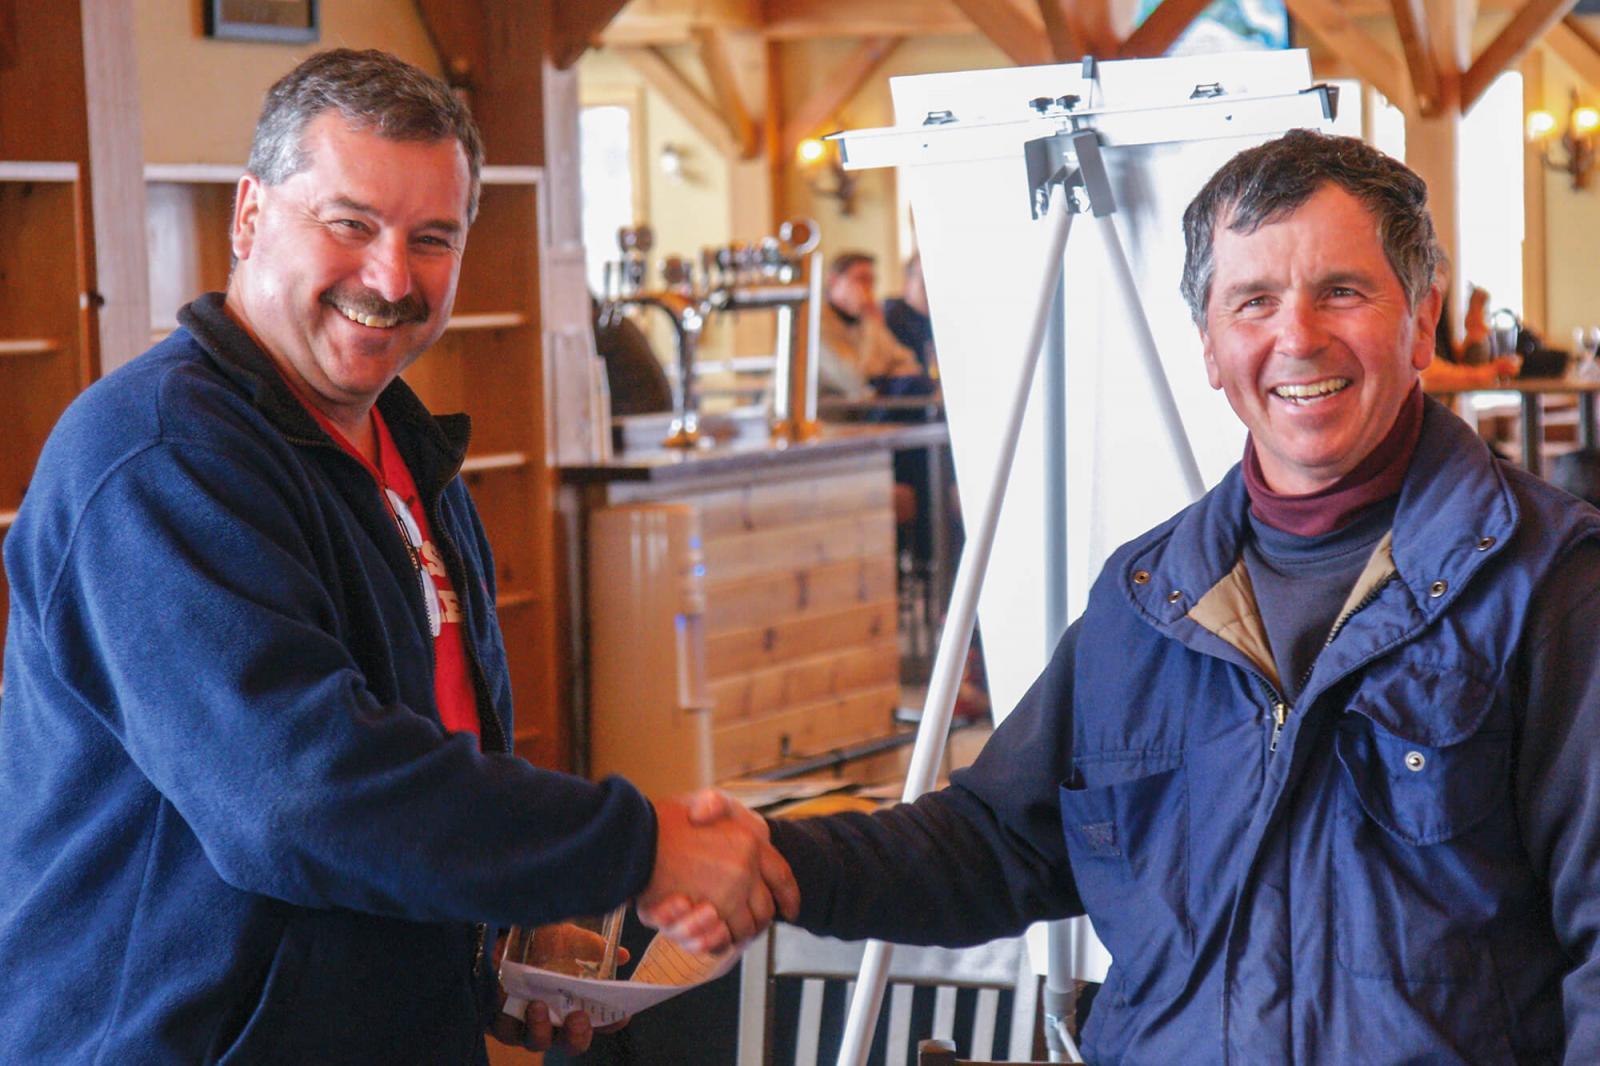 Nick Solty, left, presents Frank Solty with the trophy for fastest run of the day on the ski slopes.